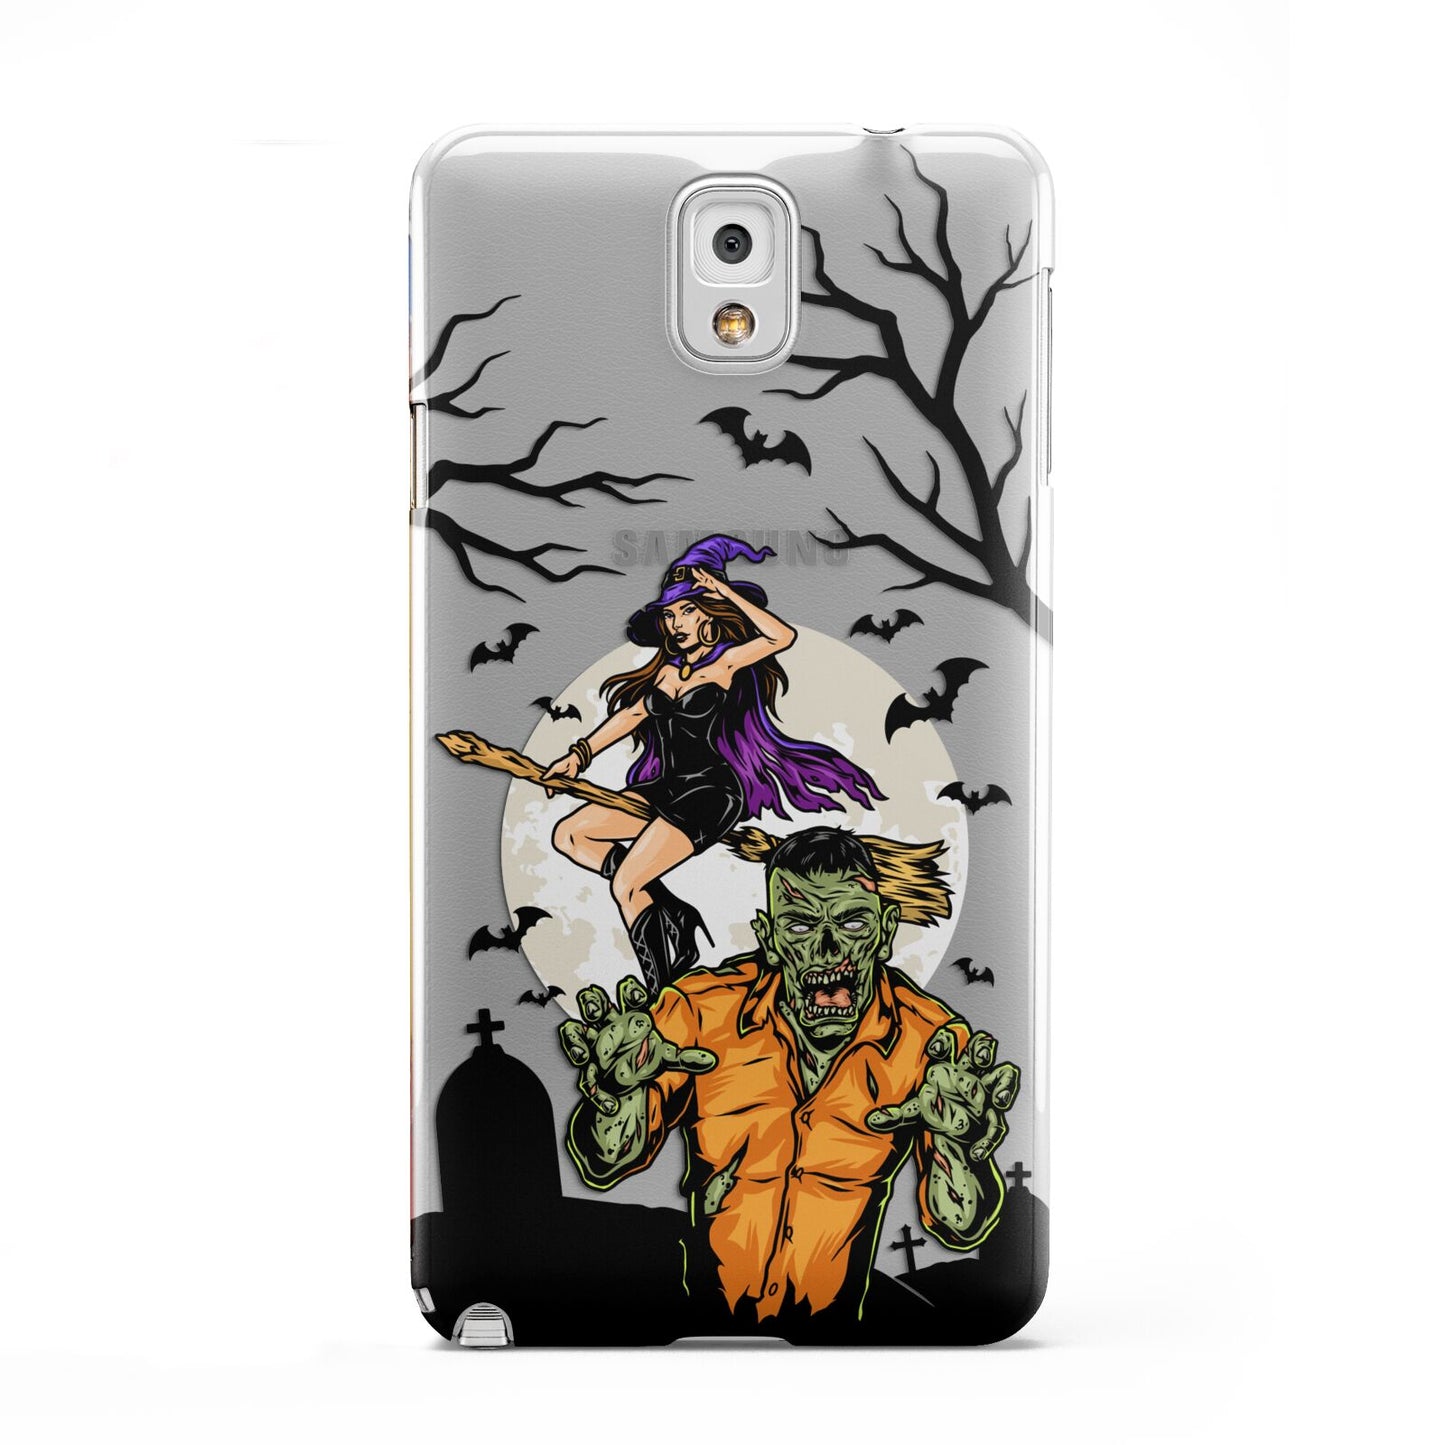 Witch Meets Zombie Samsung Galaxy Note 3 Case